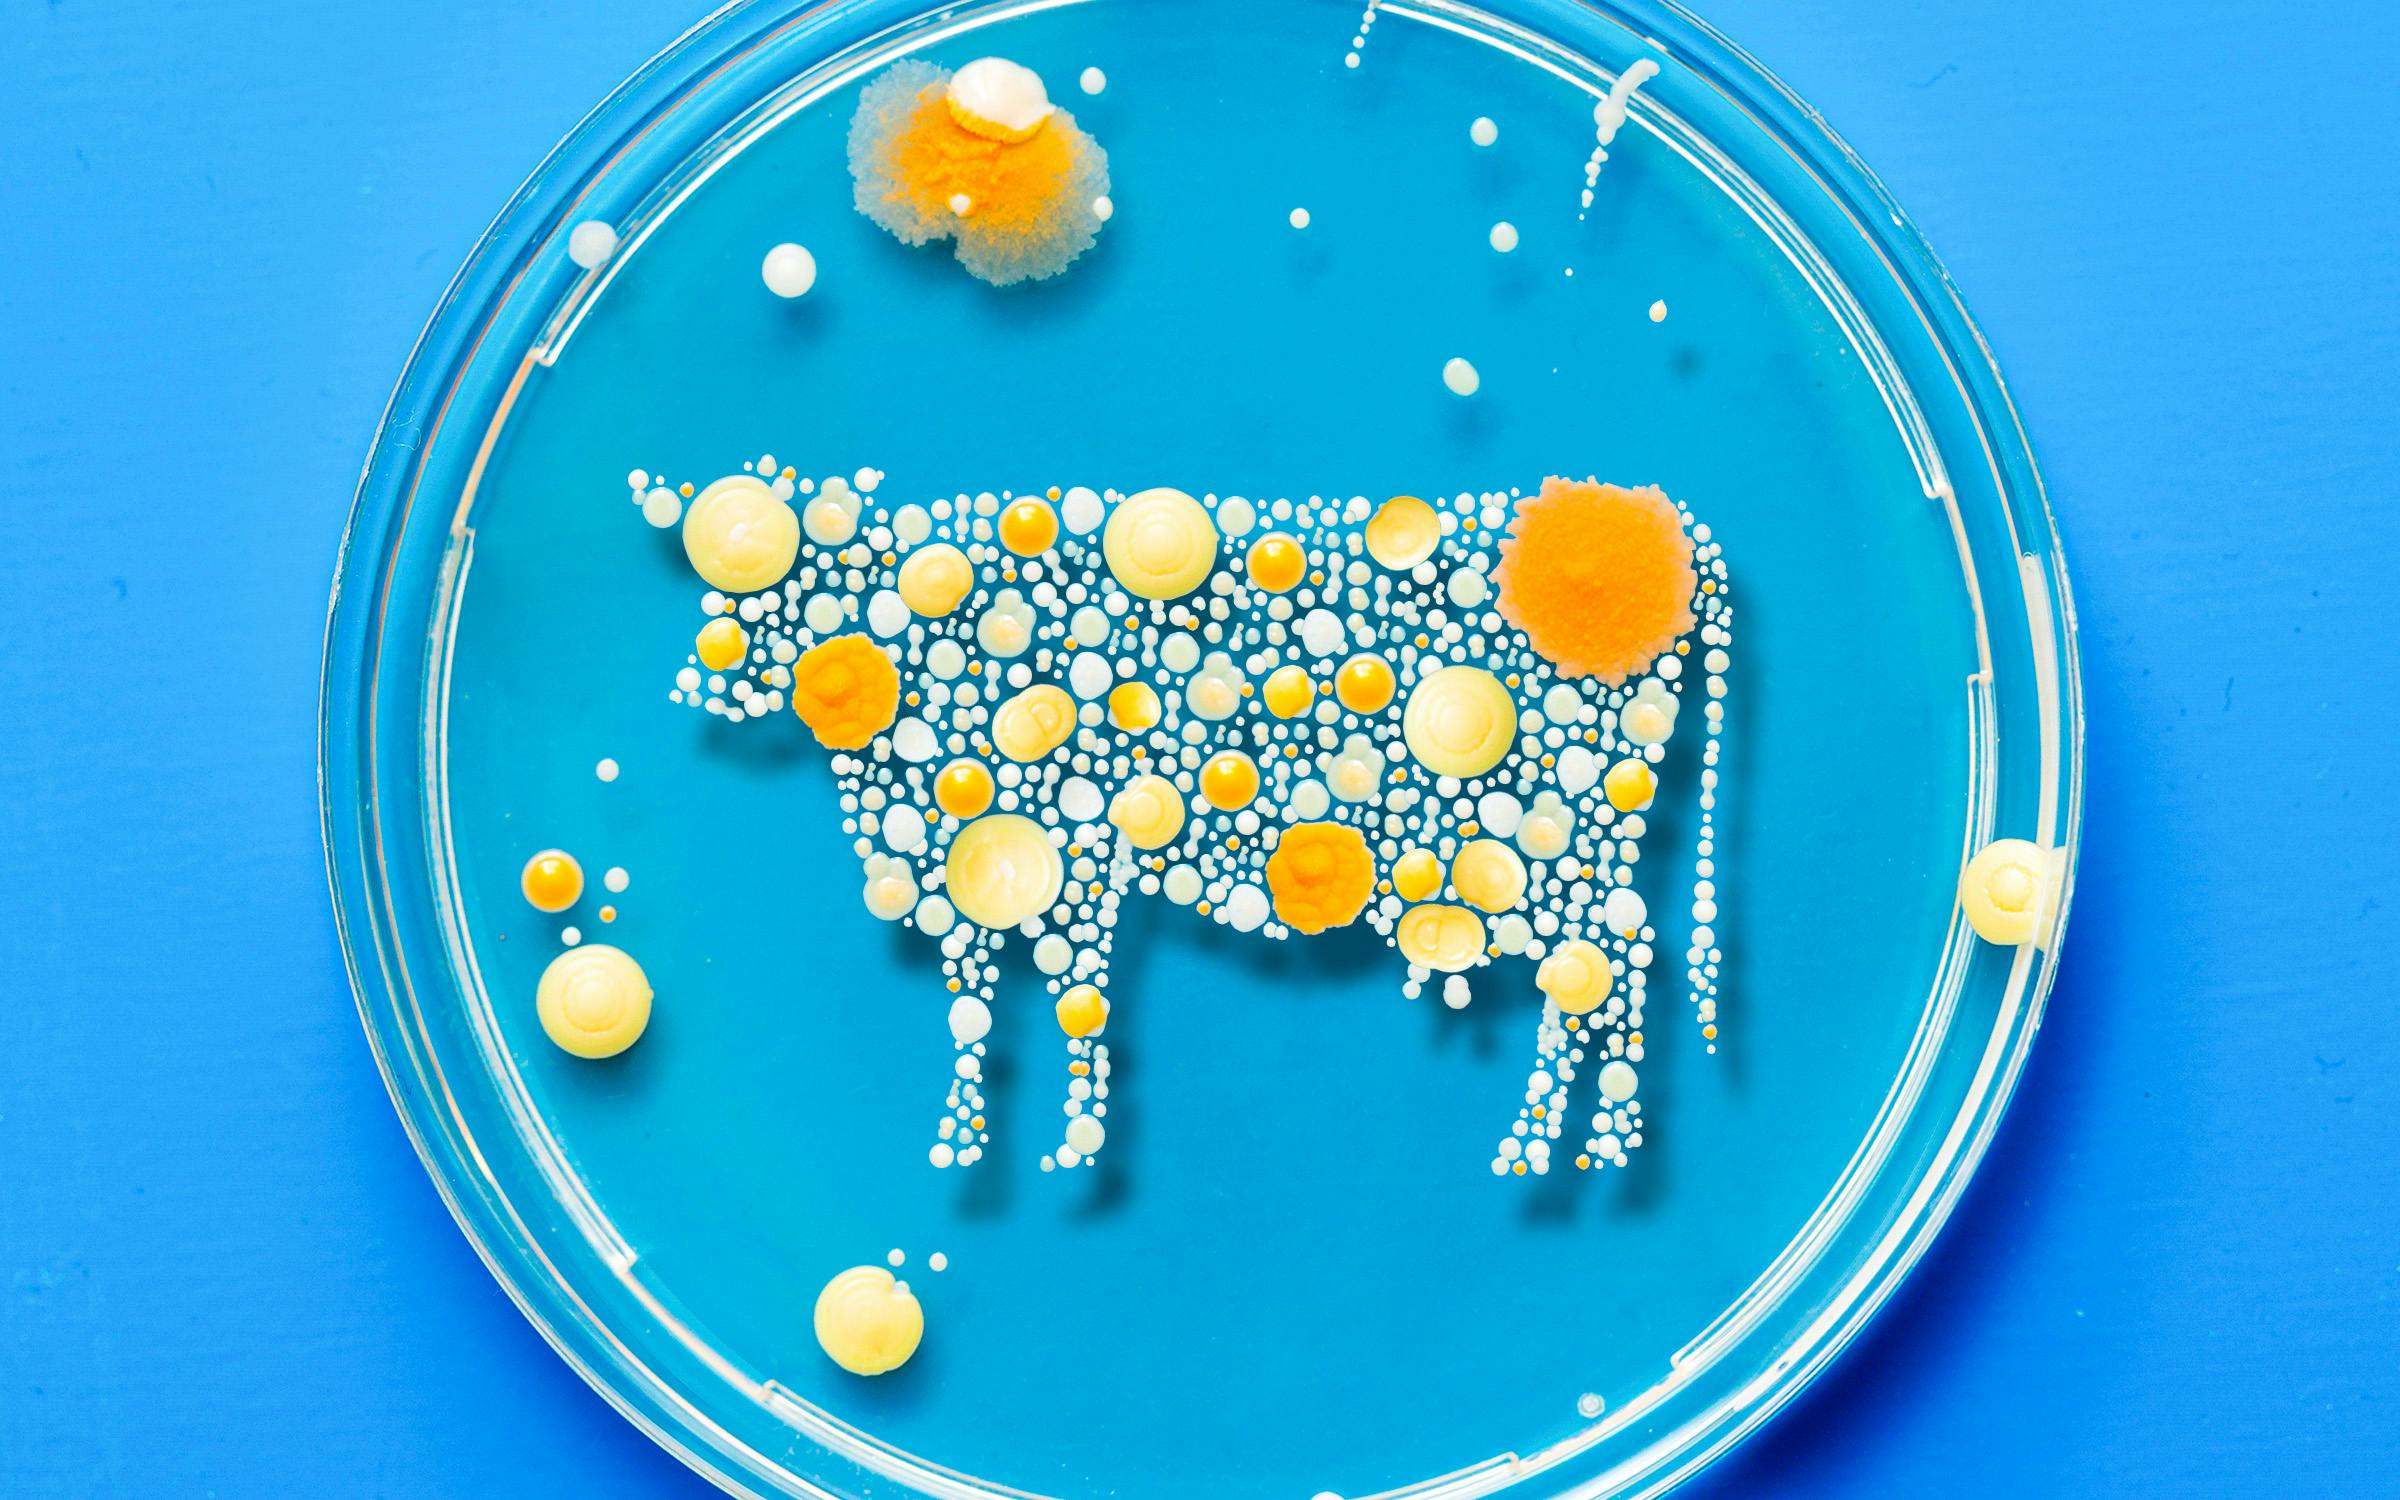 Cultured Meat is Vegan – confusion